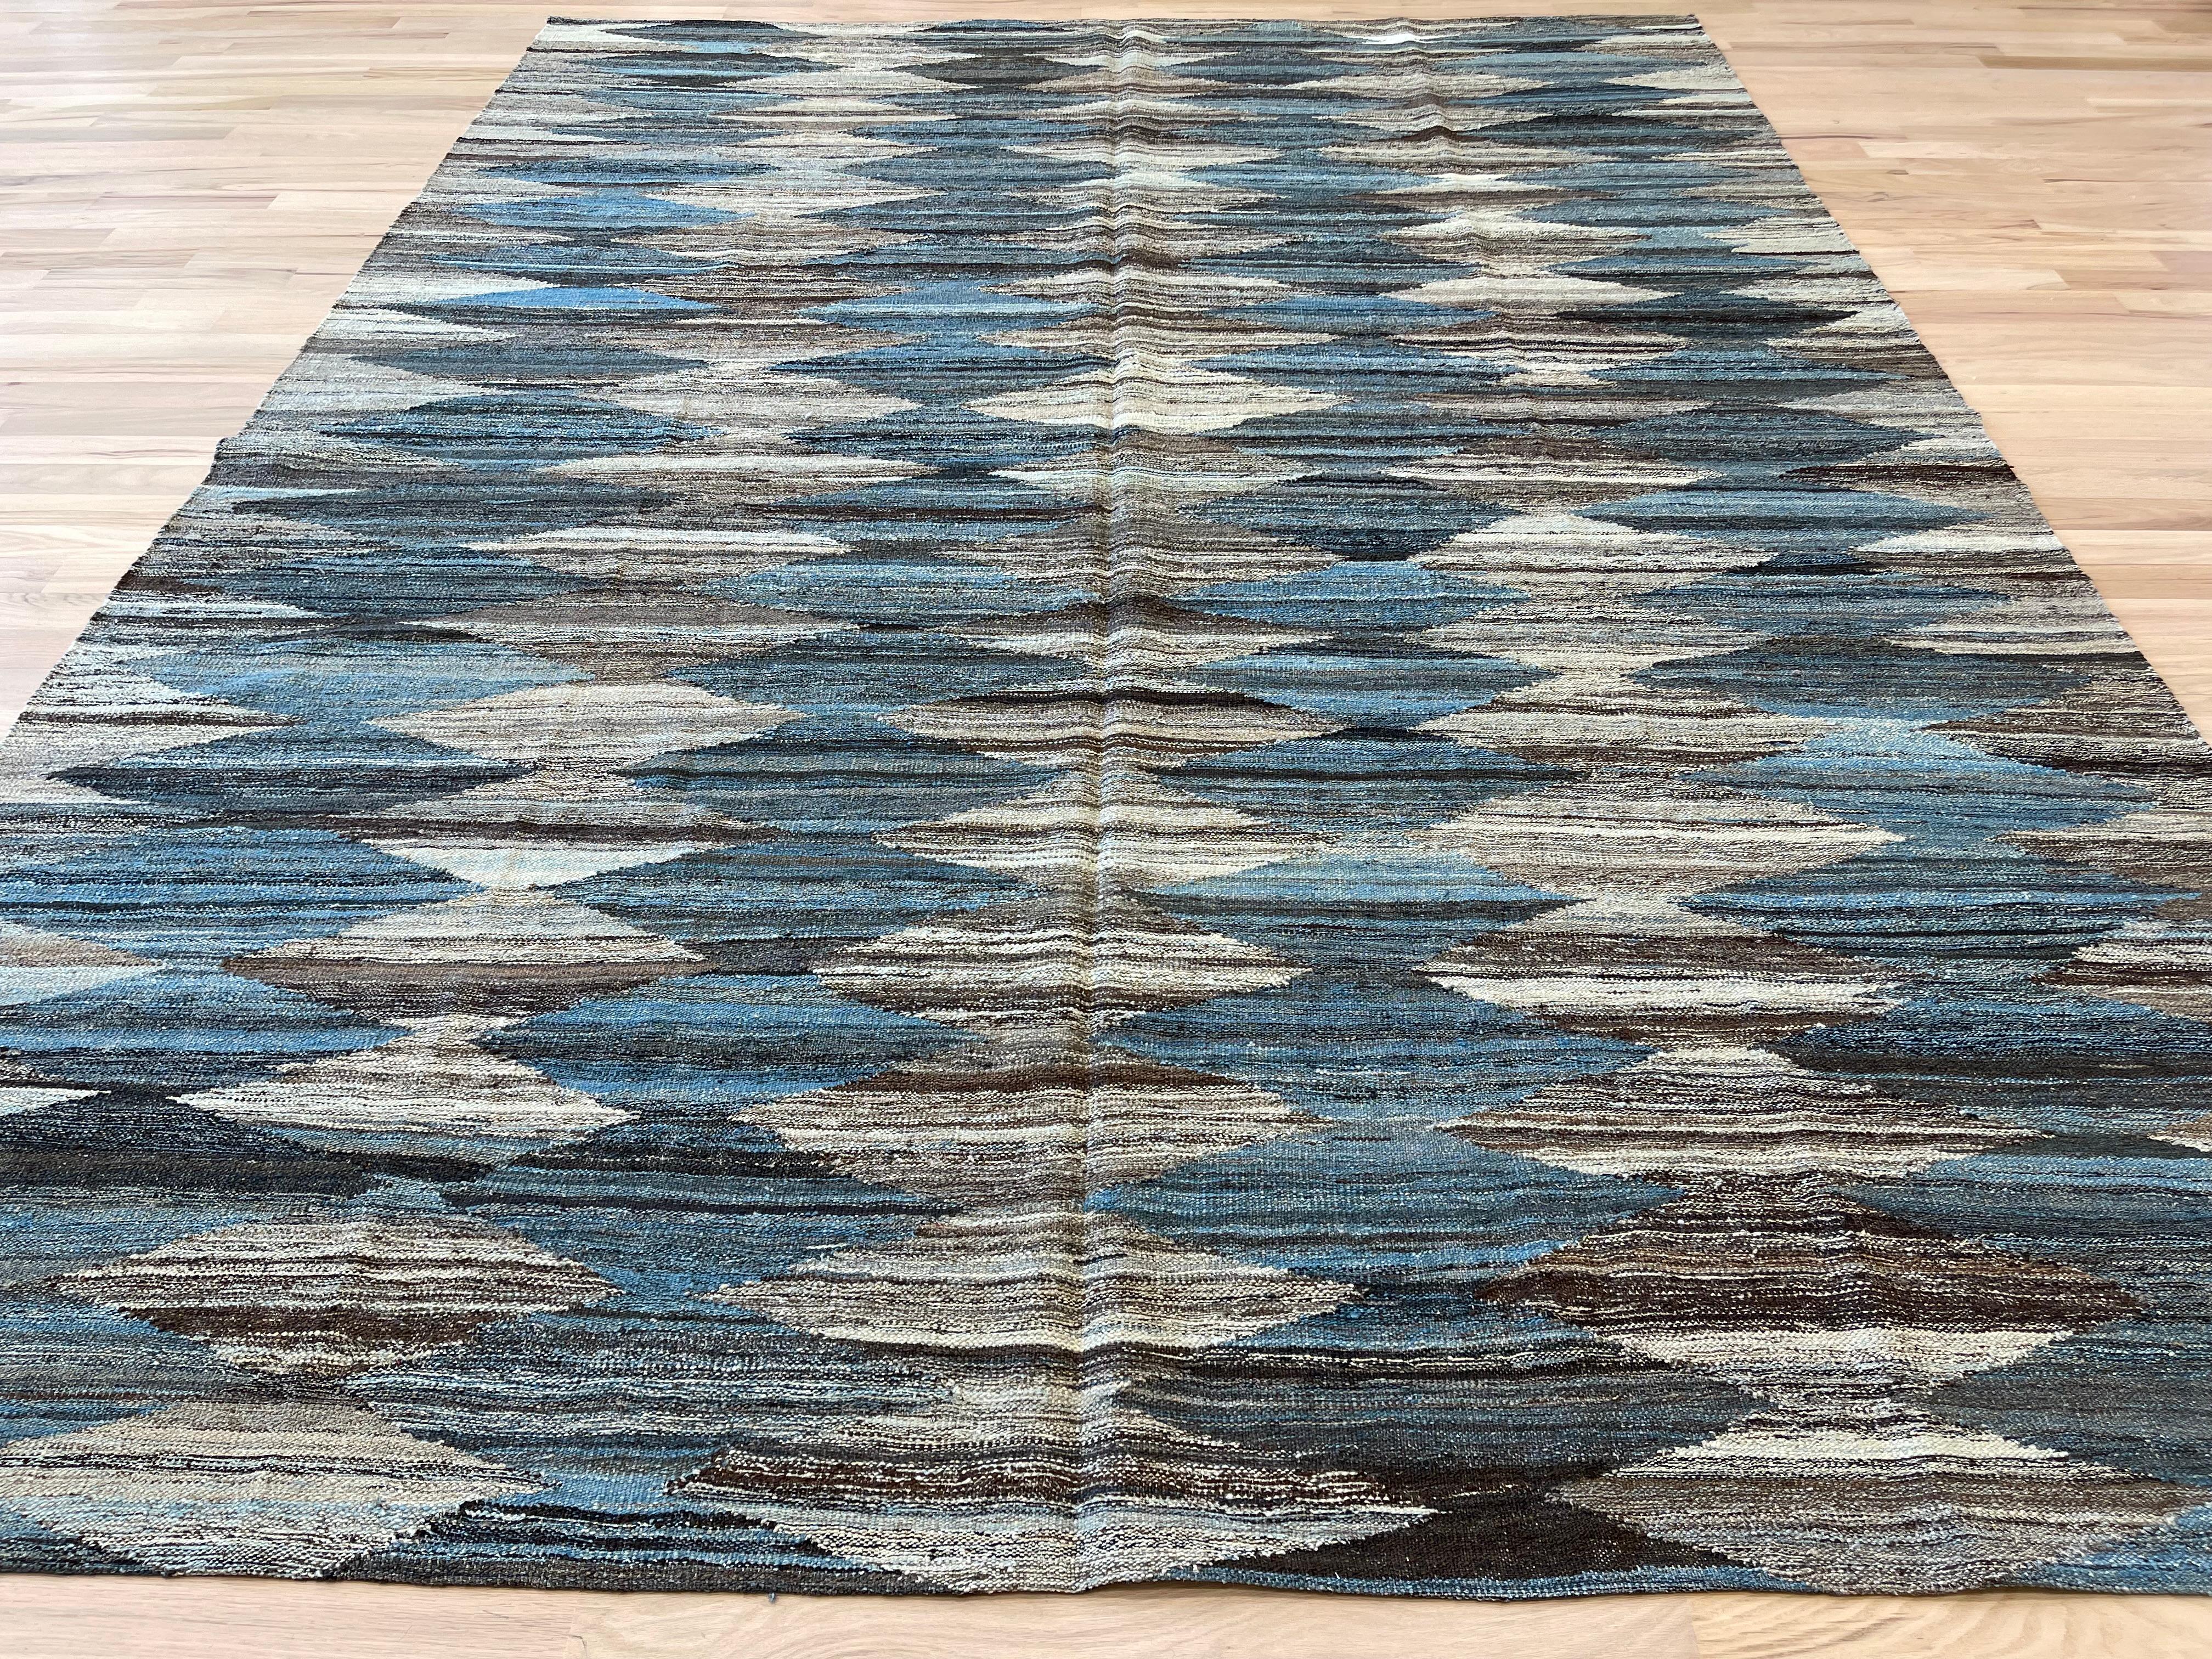 Elevate your home decor with our Turkish rug, featuring a stunning diamond pattern in shades of blue, grey, beige, and white. With its reversible use, this rug offers versatility and a touch of elegance to any room. Add a pop of color and texture